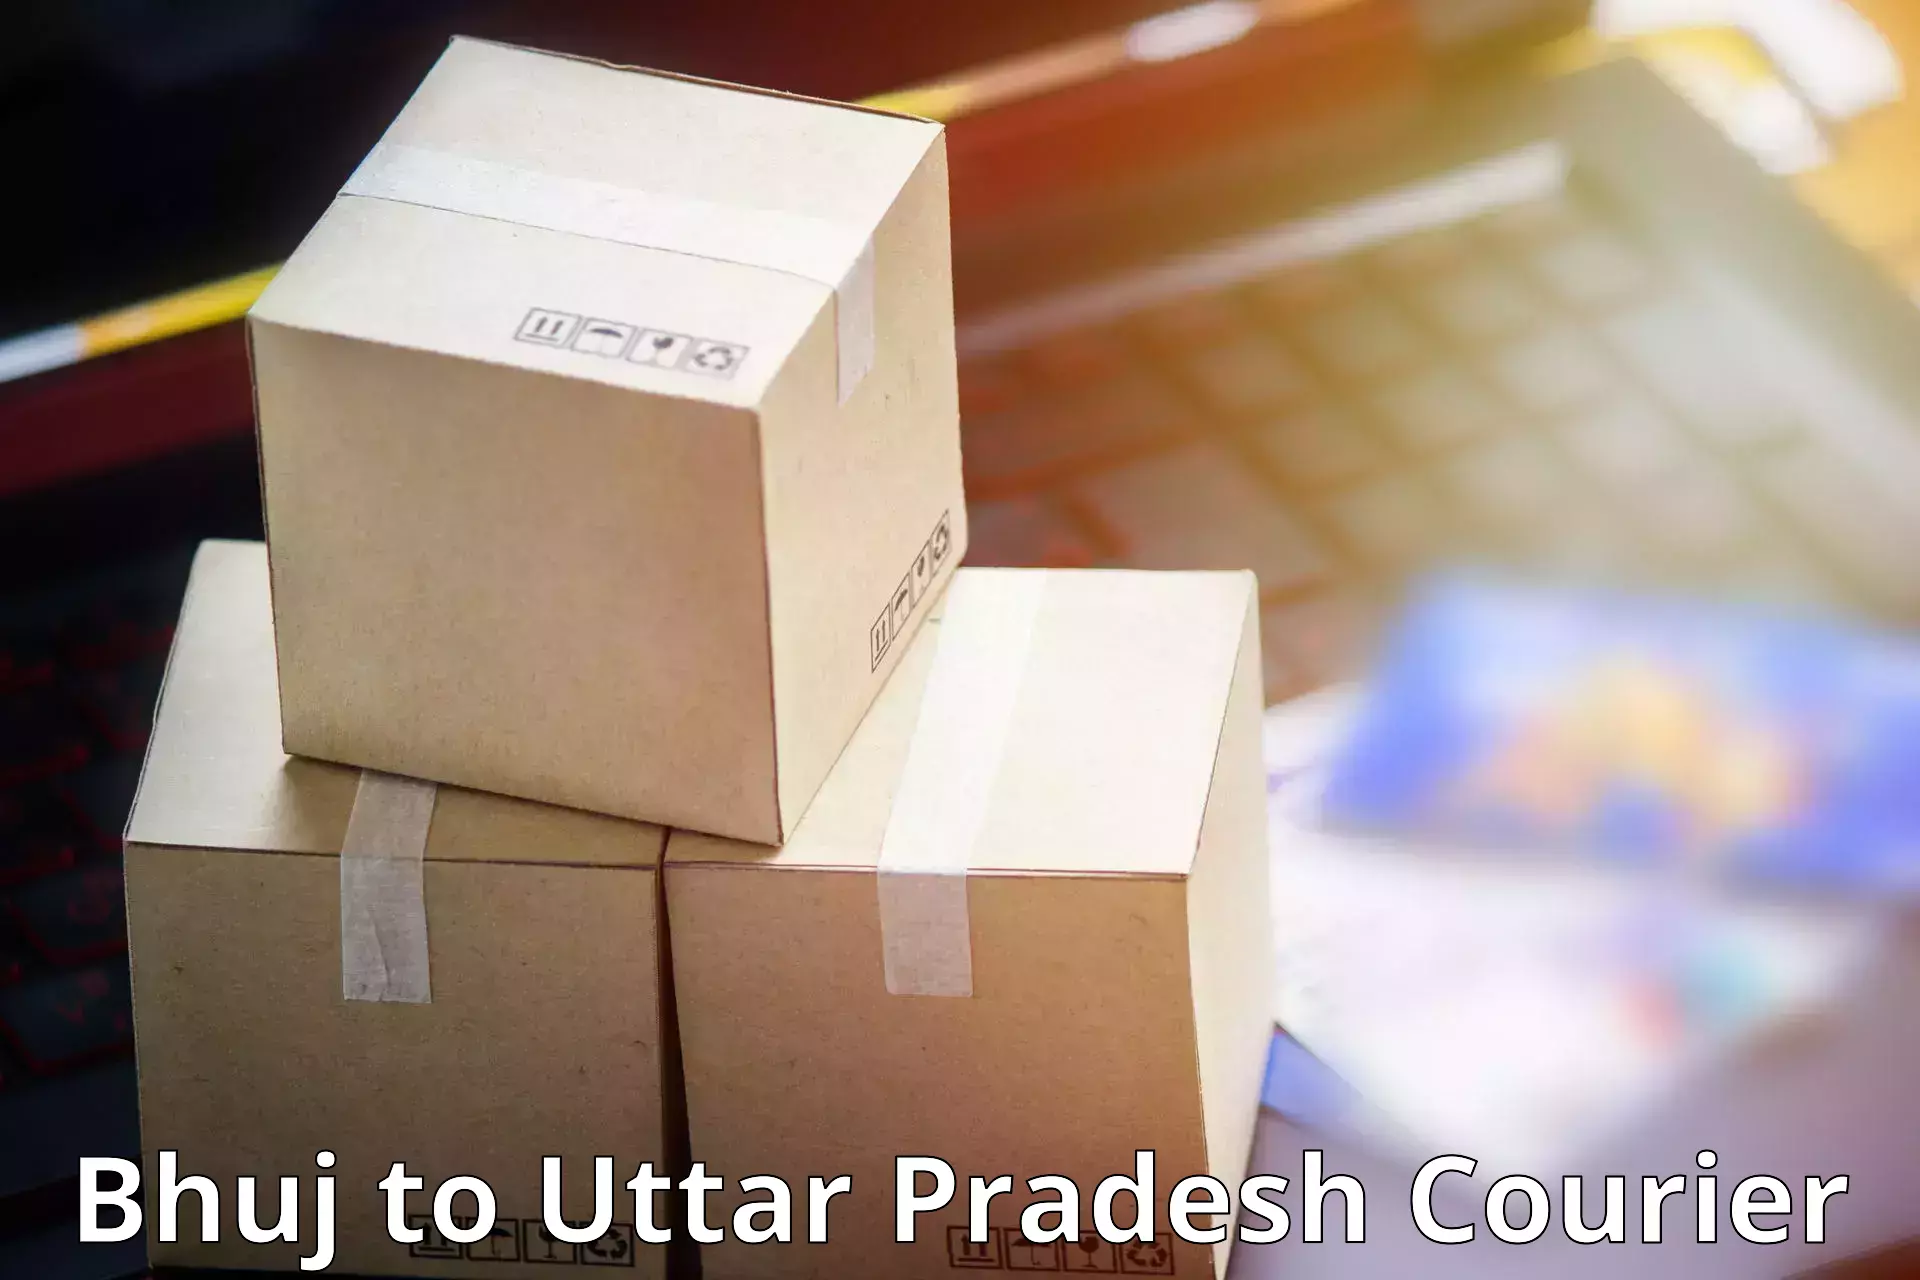 Courier service efficiency Bhuj to Aligarh